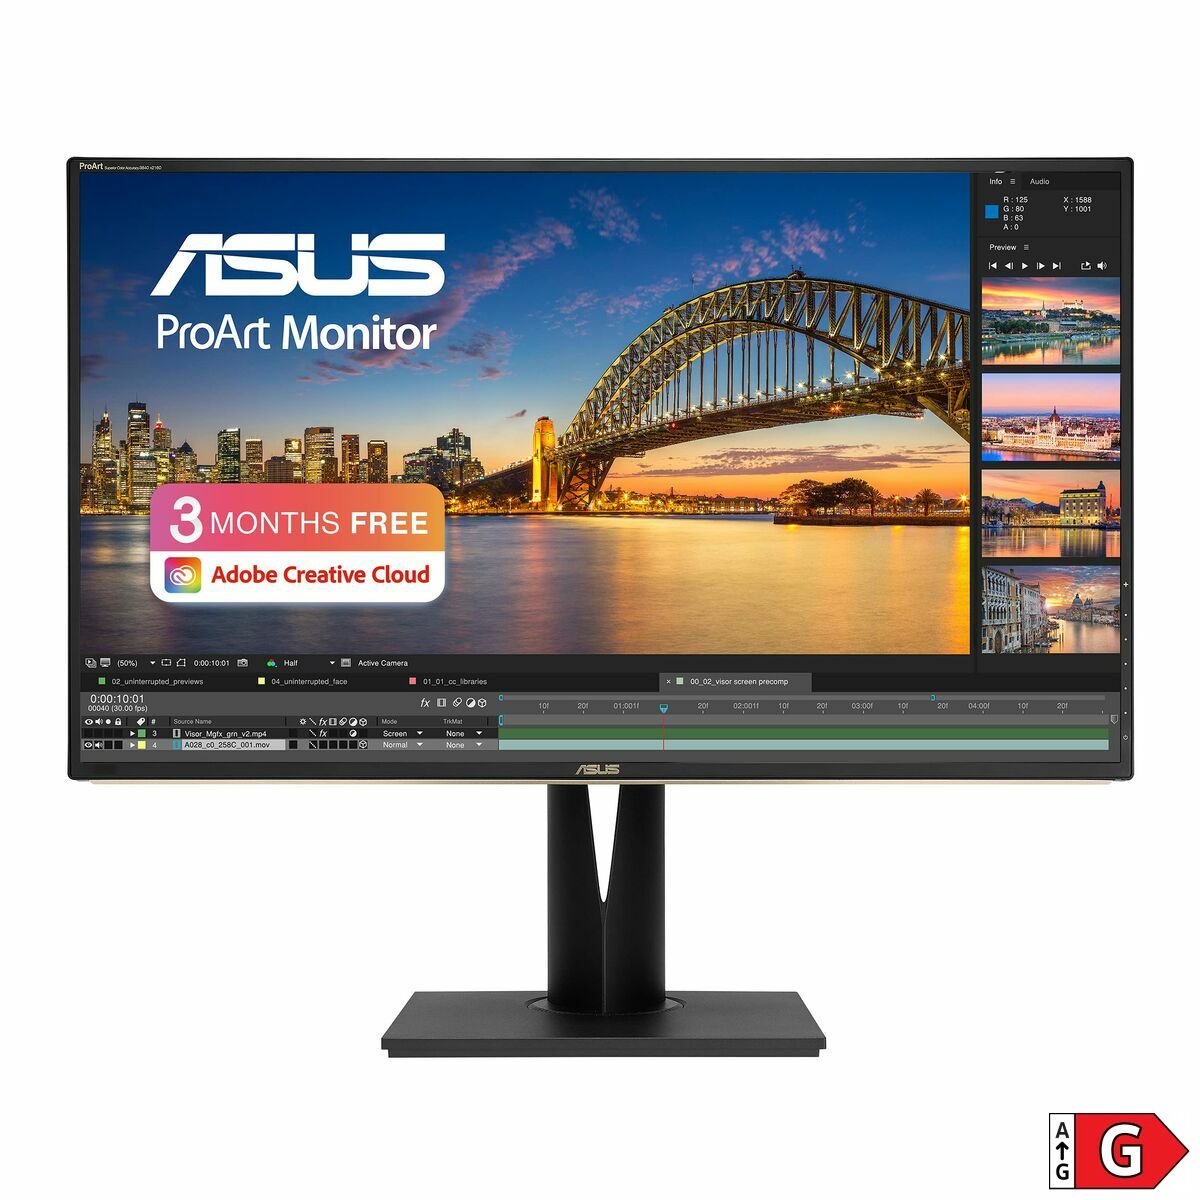 Monitor Asus ProArt PA329C 32" IPS LCD Flicker free, Asus, Computing, monitor-asus-proart-pa329c-32-ips-lcd-flicker-free, Brand_Asus, category-reference-2609, category-reference-2642, category-reference-2644, category-reference-t-19685, computers / peripherals, Condition_NEW, office, Price_+ 1000, Teleworking, RiotNook